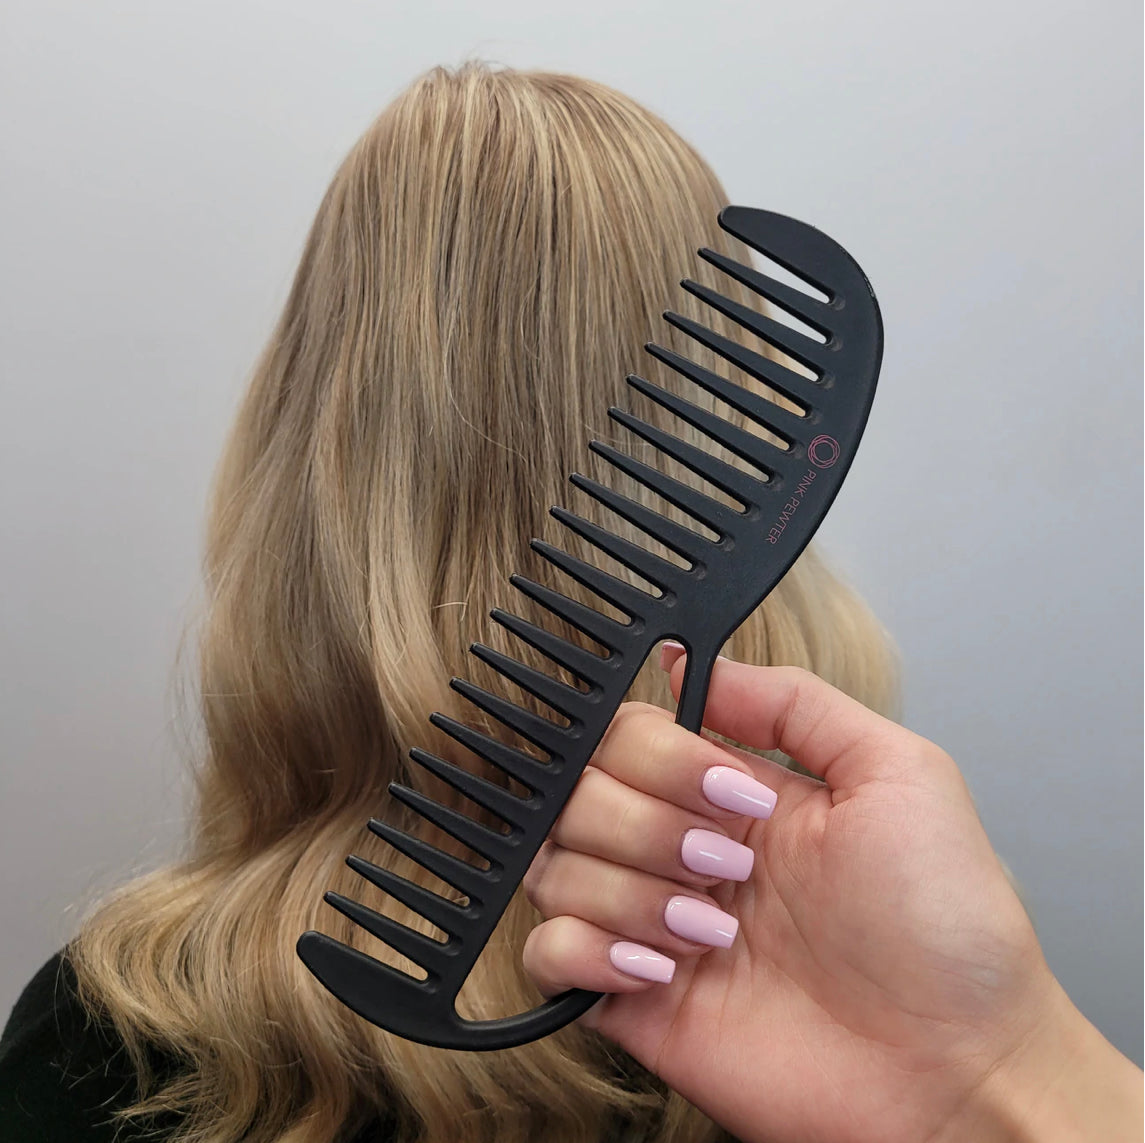 Pink Pewter "Never Let Go" Carbon Fibre Detangling and Styling Comb #4 Phoenix Nationale